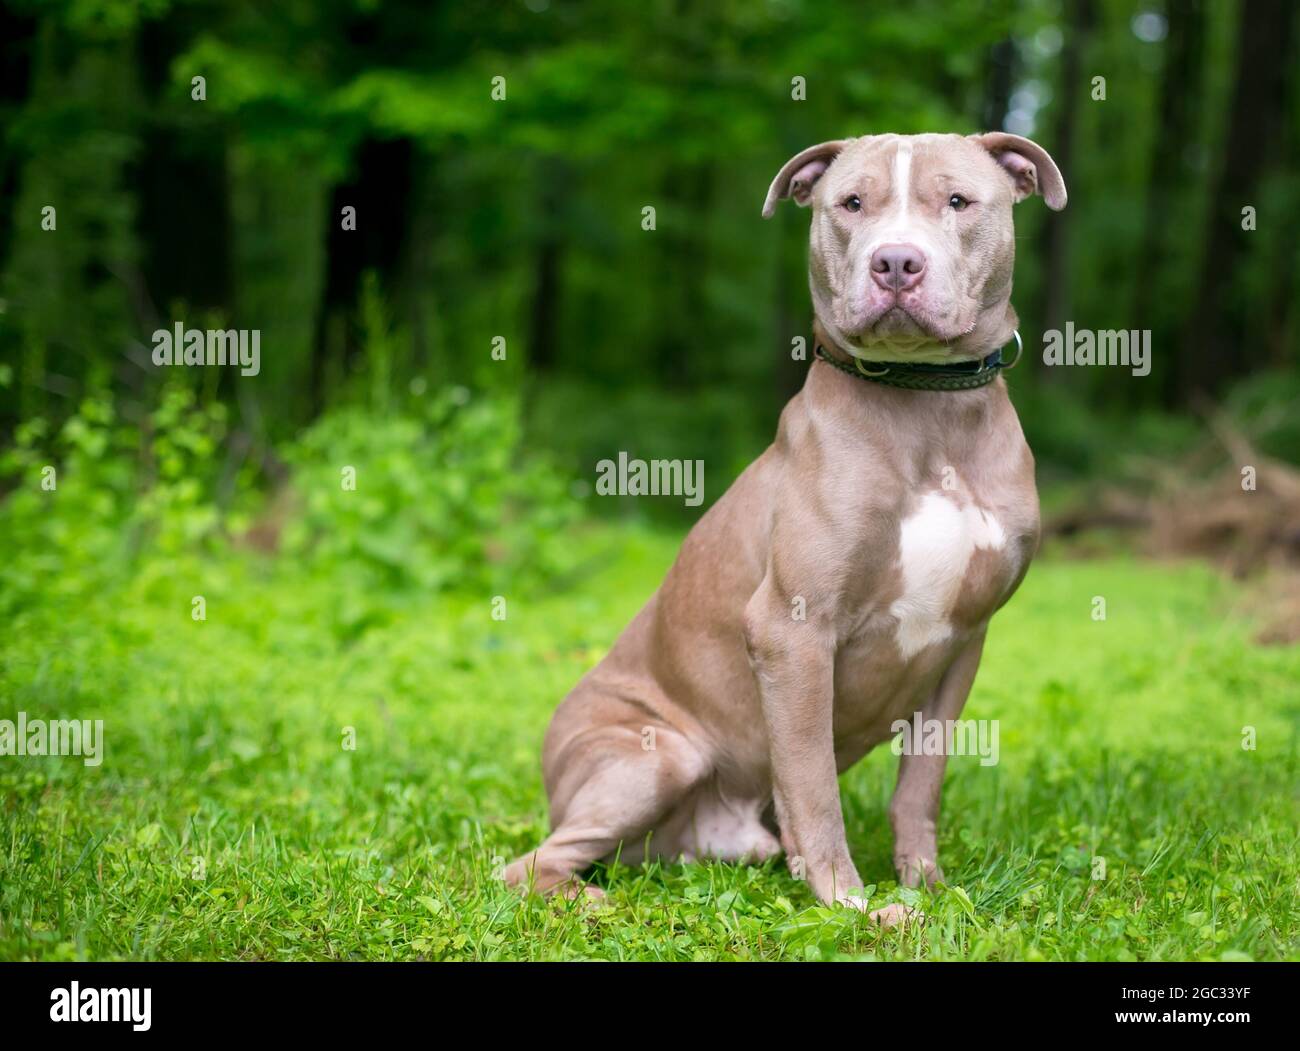 A cute Pit Bull Terrier x Shar Pei mixed breed dog sitting outdoors Stock Photo